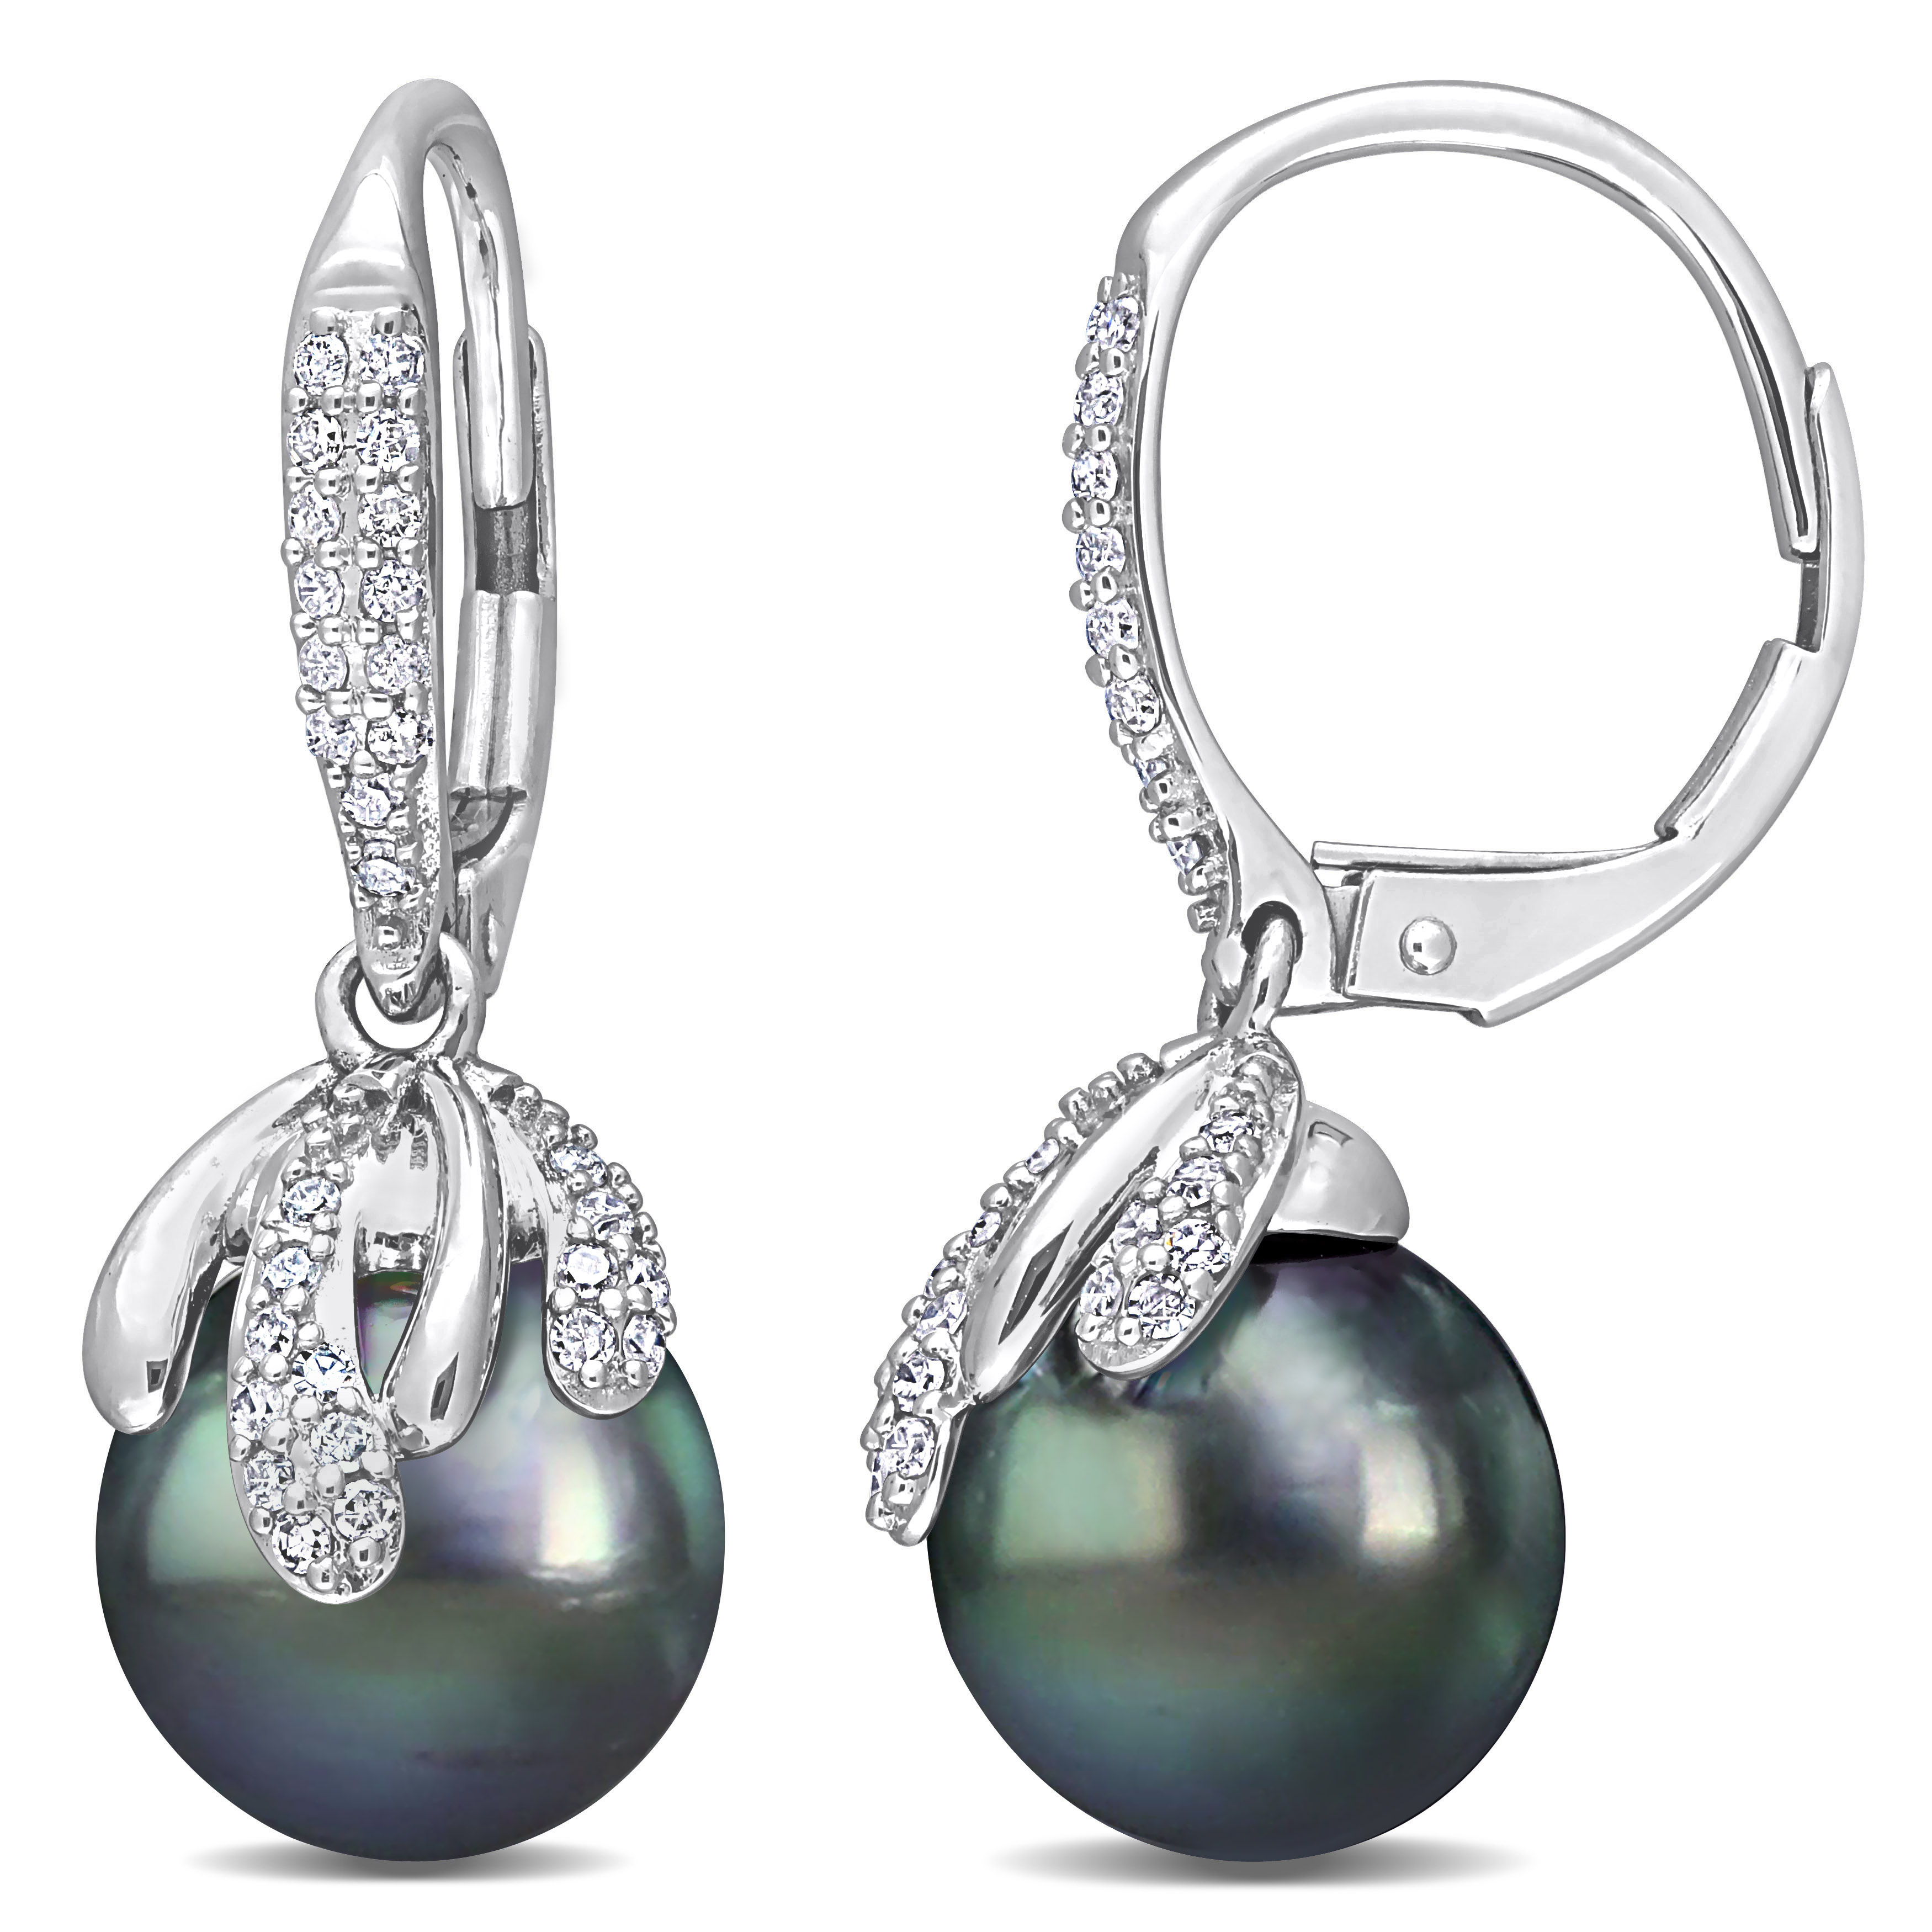 9-10 MM Black Tahitian Cultured Pearl and 1/3 CT TW Diamond Leverback Earrings in 14k White Gold